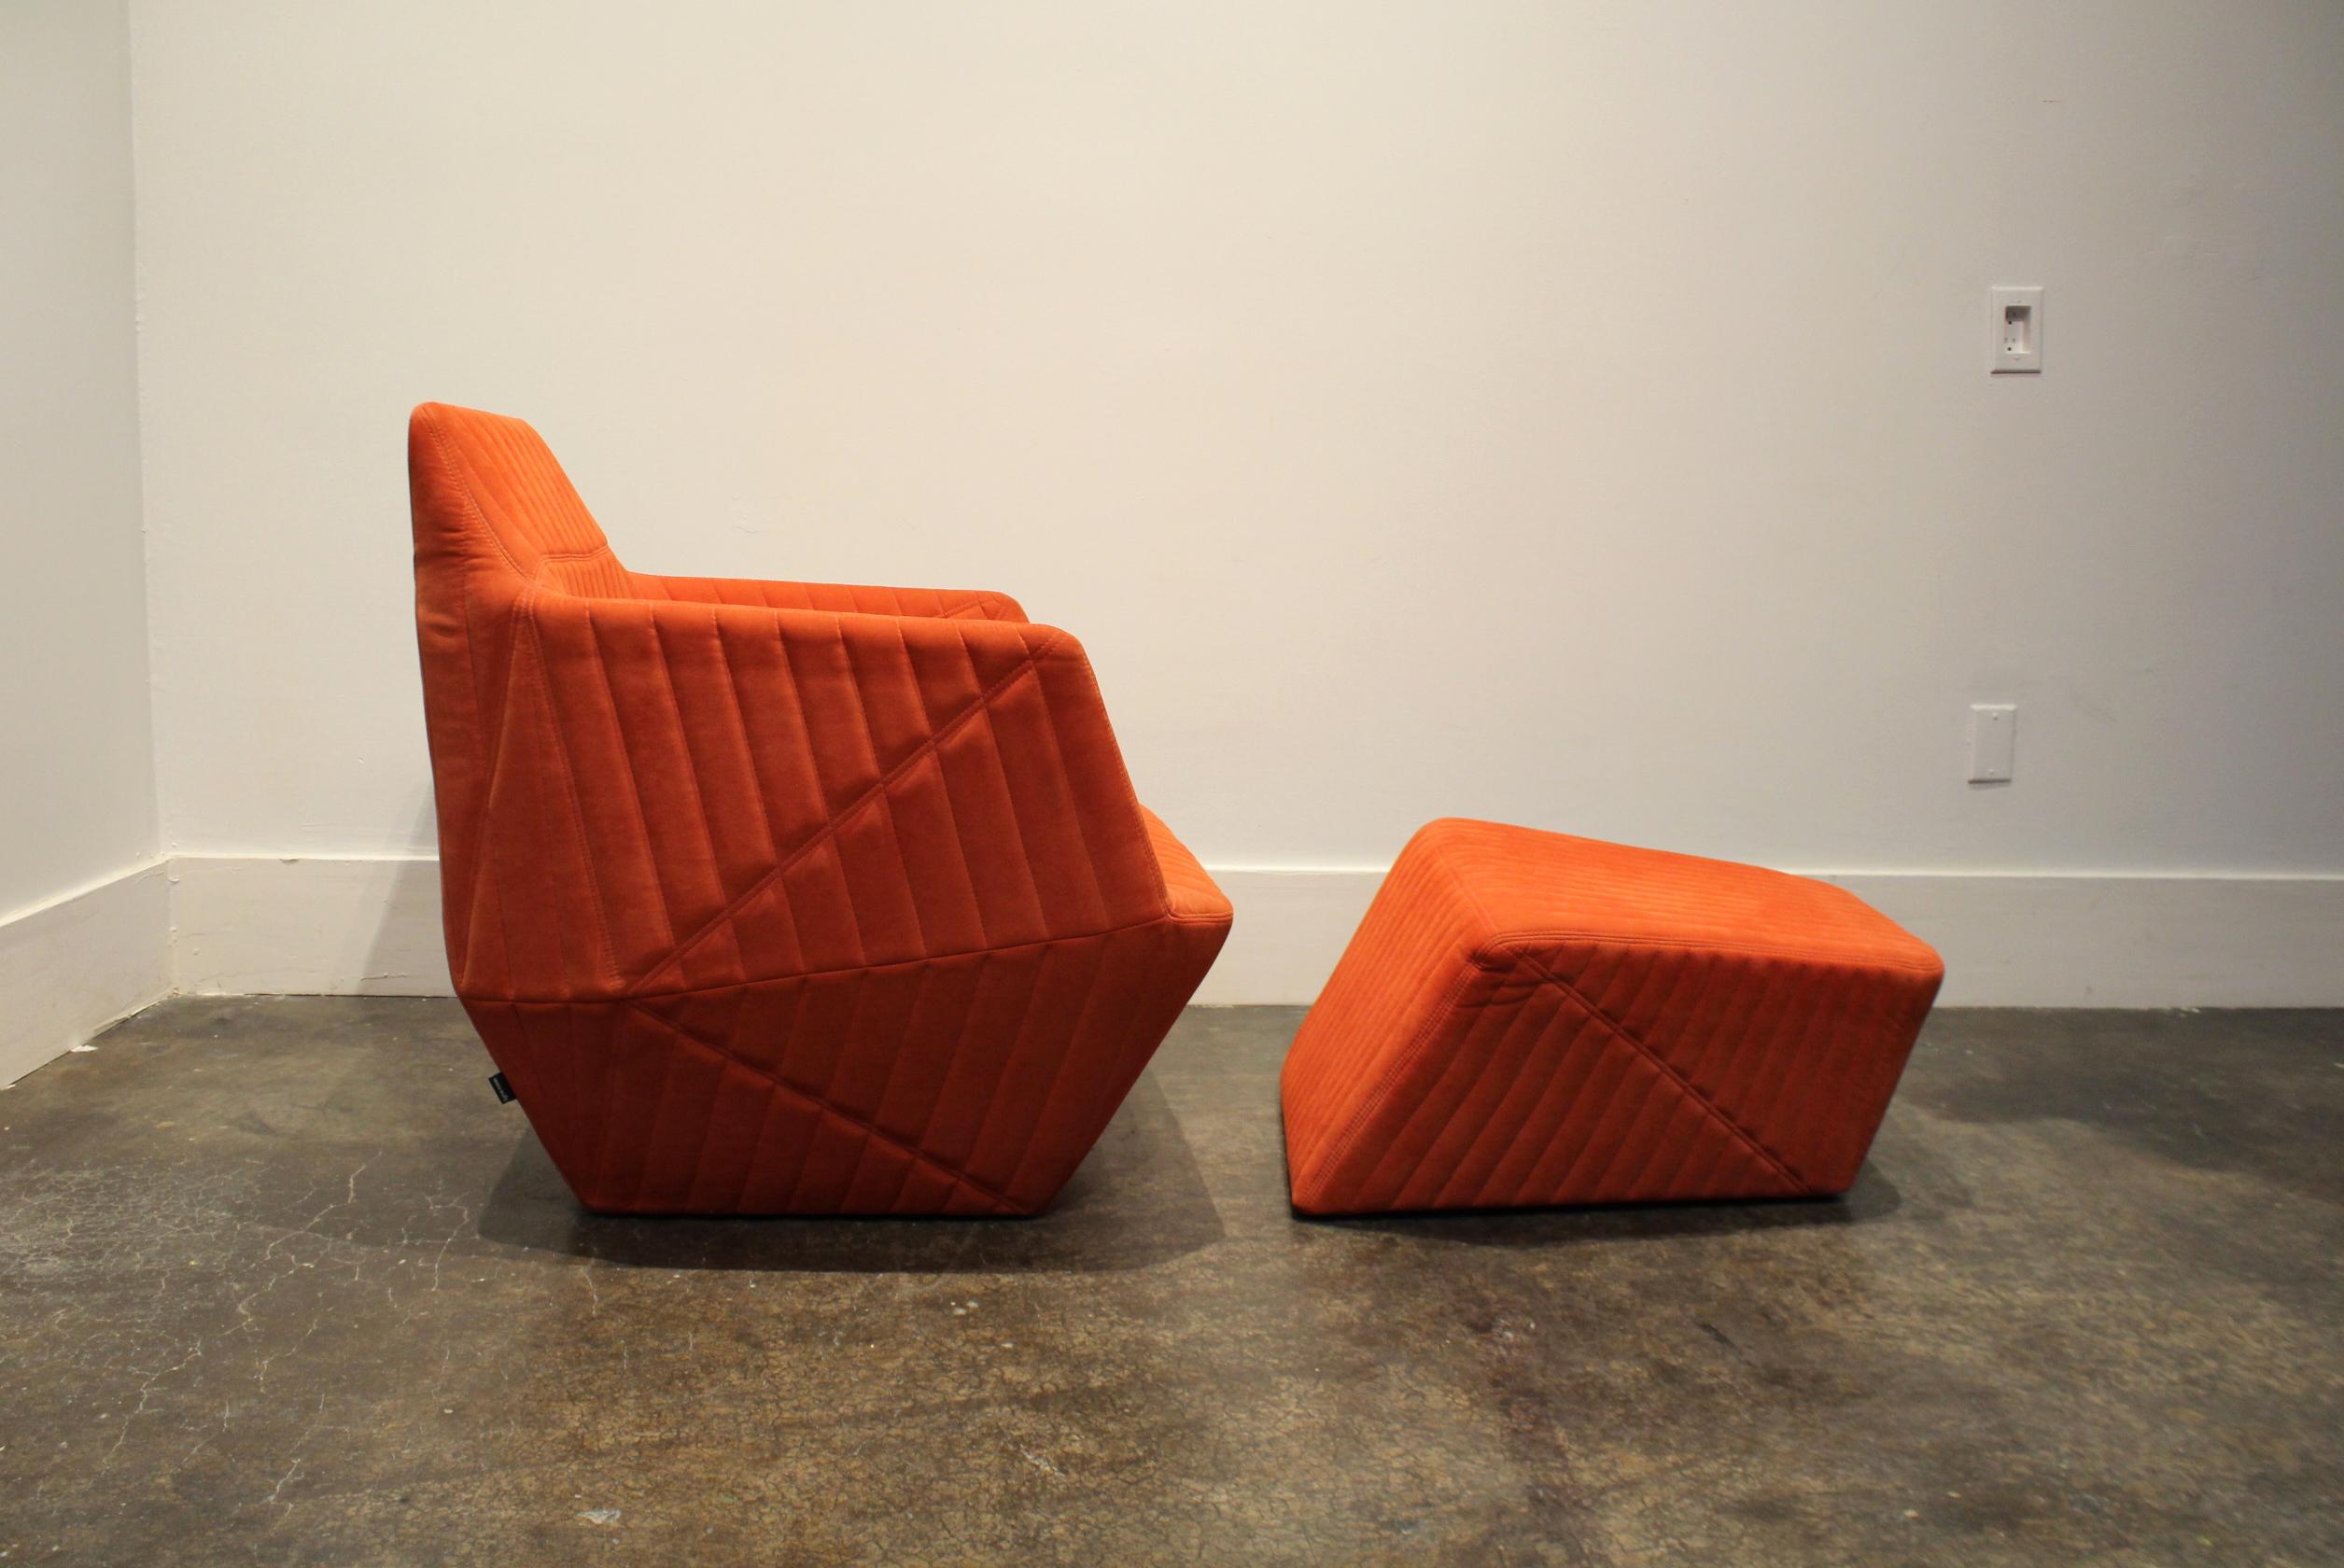 Modern Facett lounge chair and ottoman by R. & E. Bouroullec for Ligne Roset in rare tangerine/orange color. The extensive stitching across all surfaces of this piece gives it a monolithic, and very contemporary, sculpted look. Construction; three